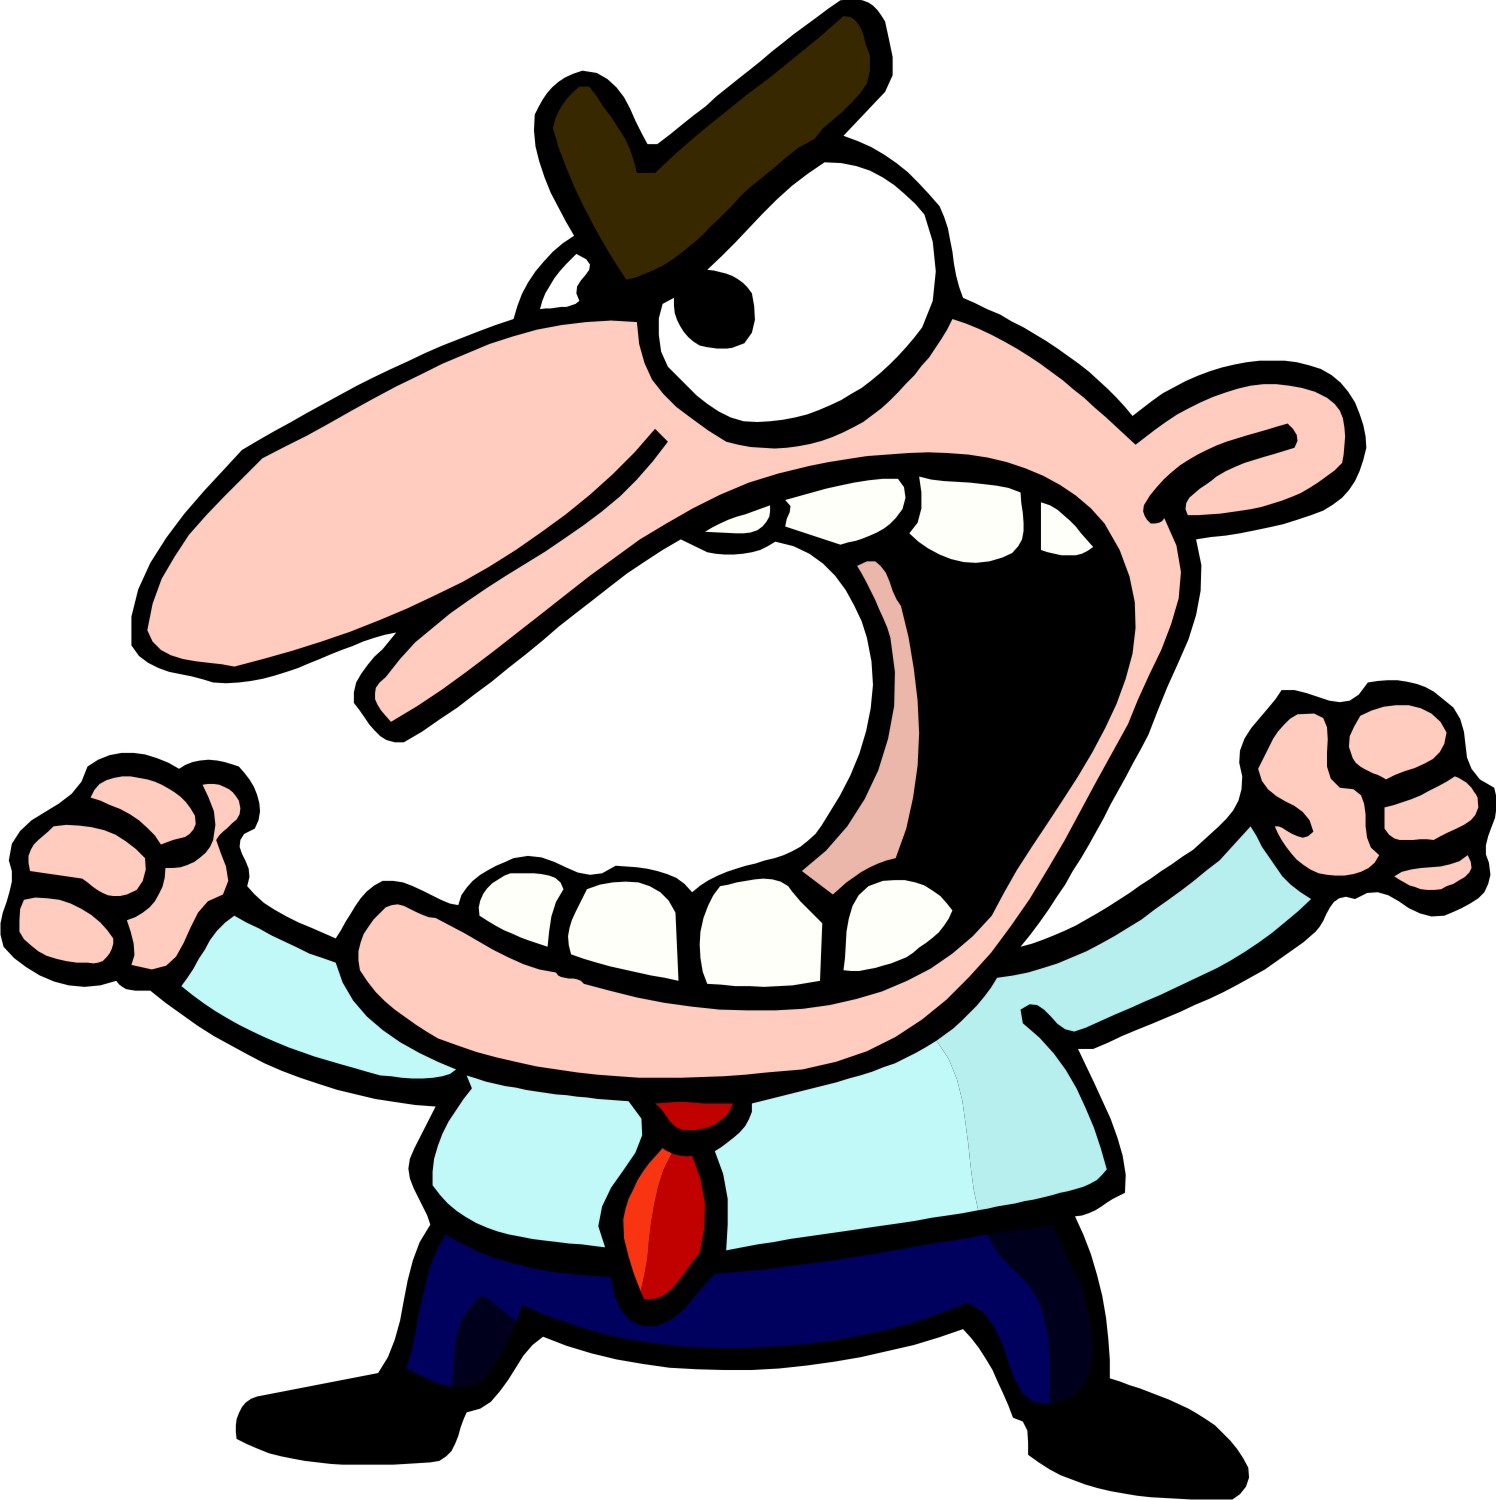 Anger clipart #13, Download drawings